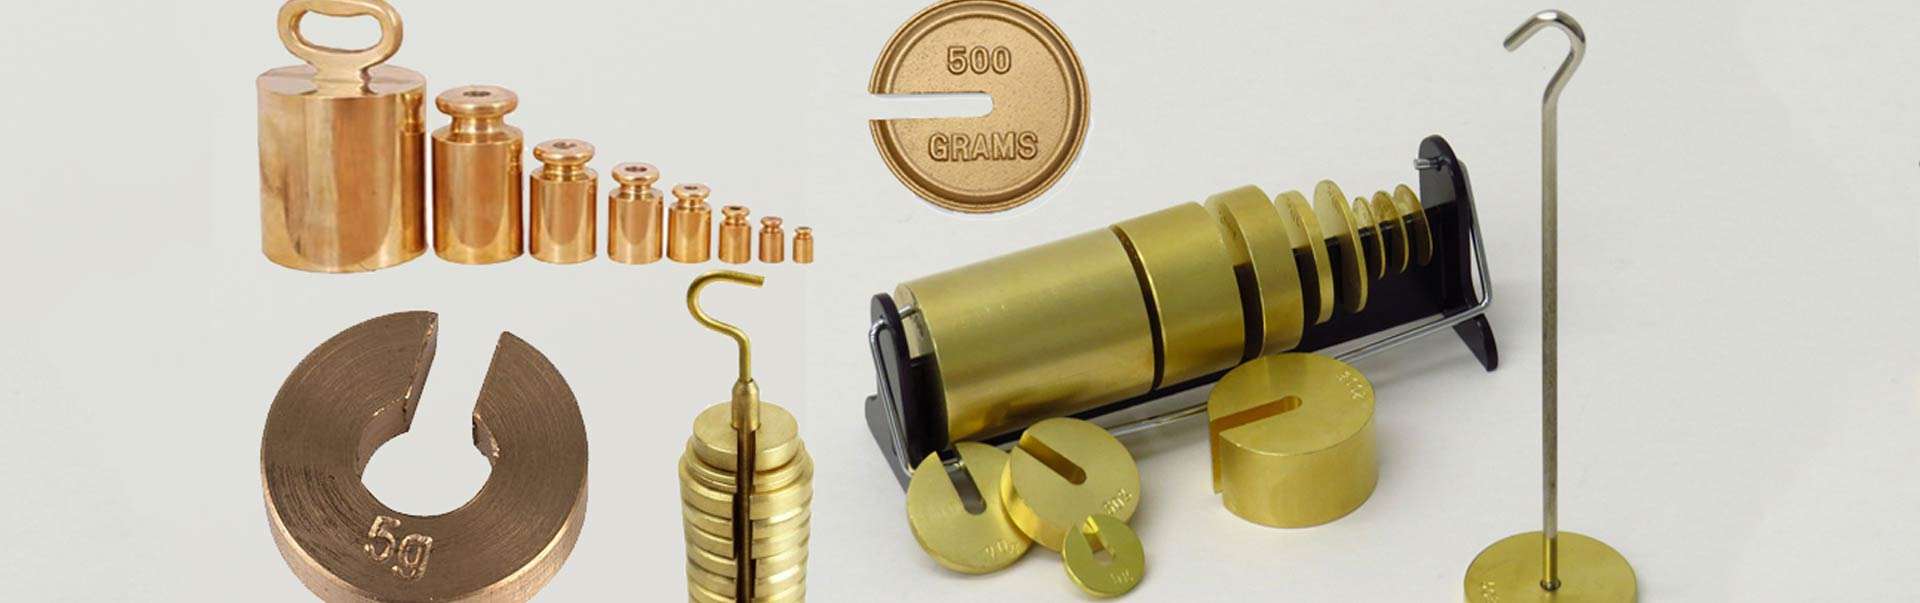 Test Weights Manufacturers in ranchi